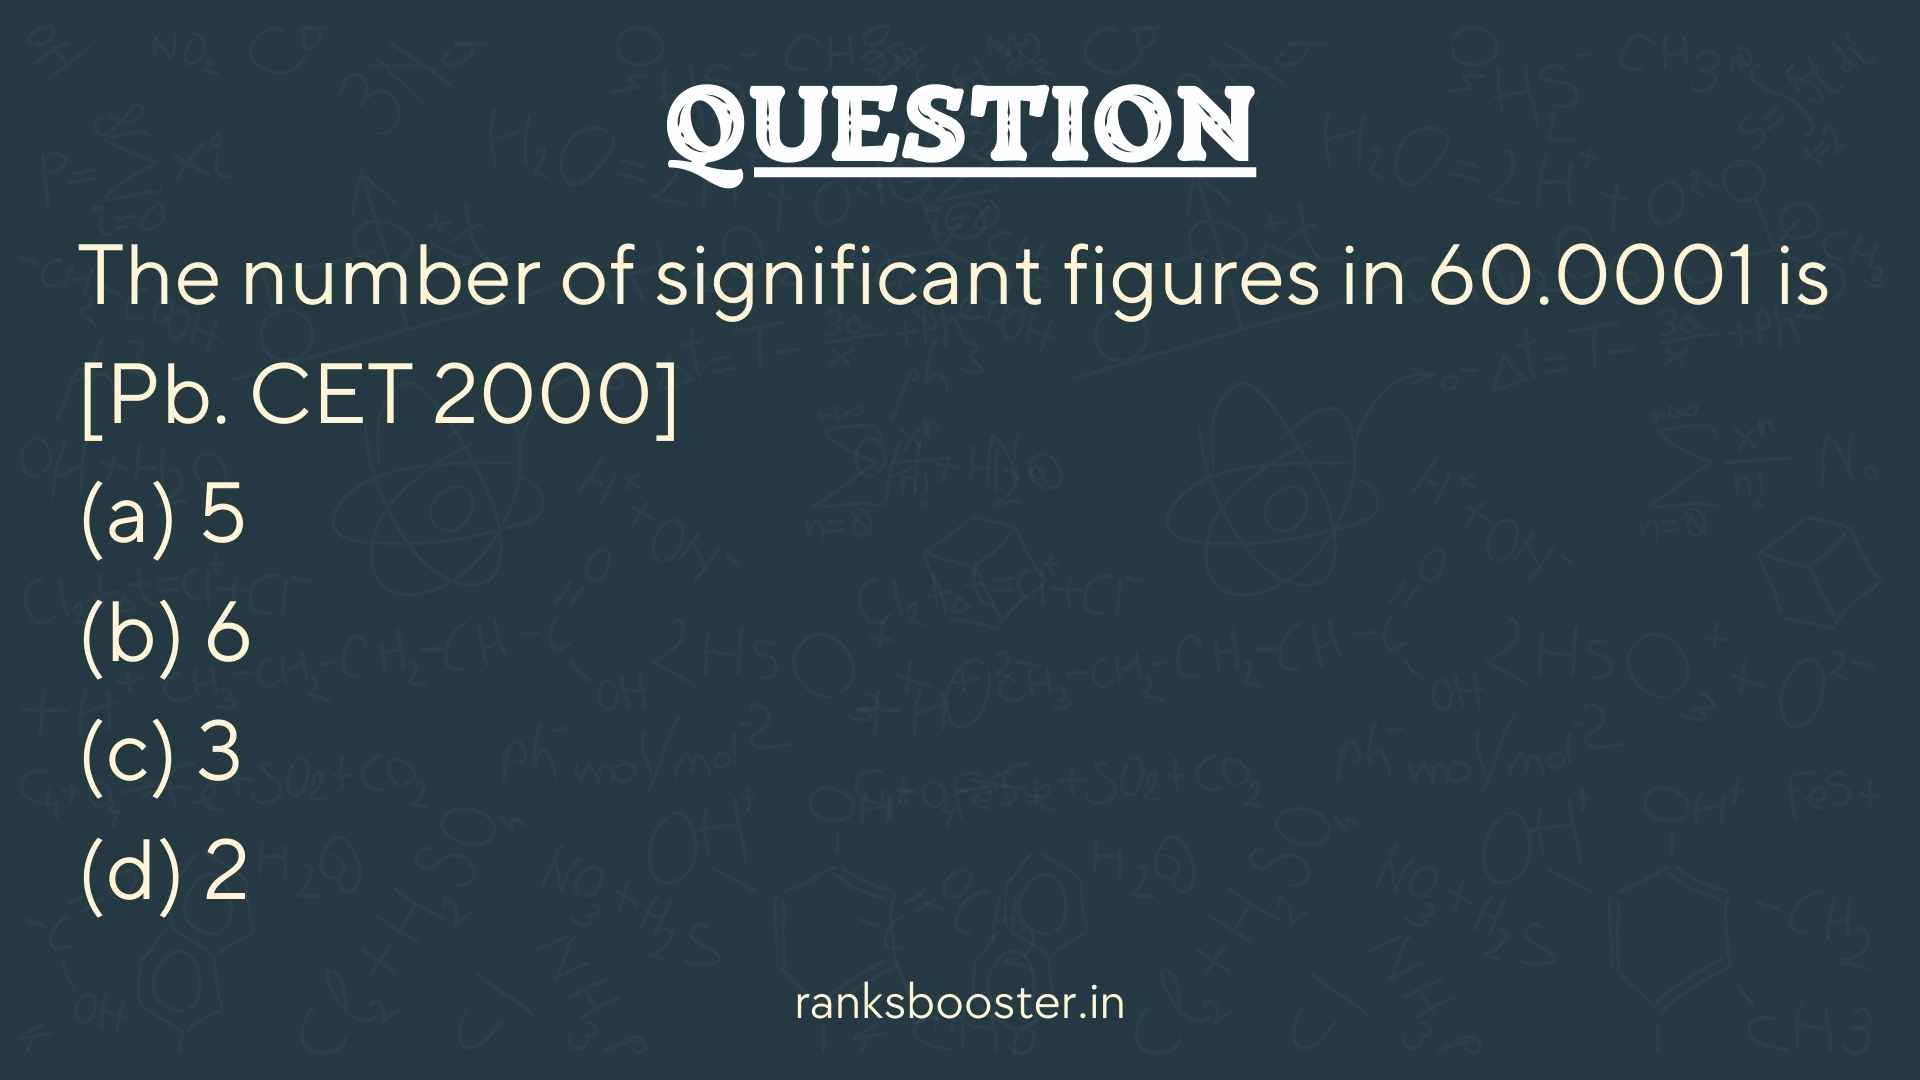 Question: The number of significant figures in 60.0001 is [Pb. CET 2000] (a) 5 (b) 6 (c) 3 (d) 2